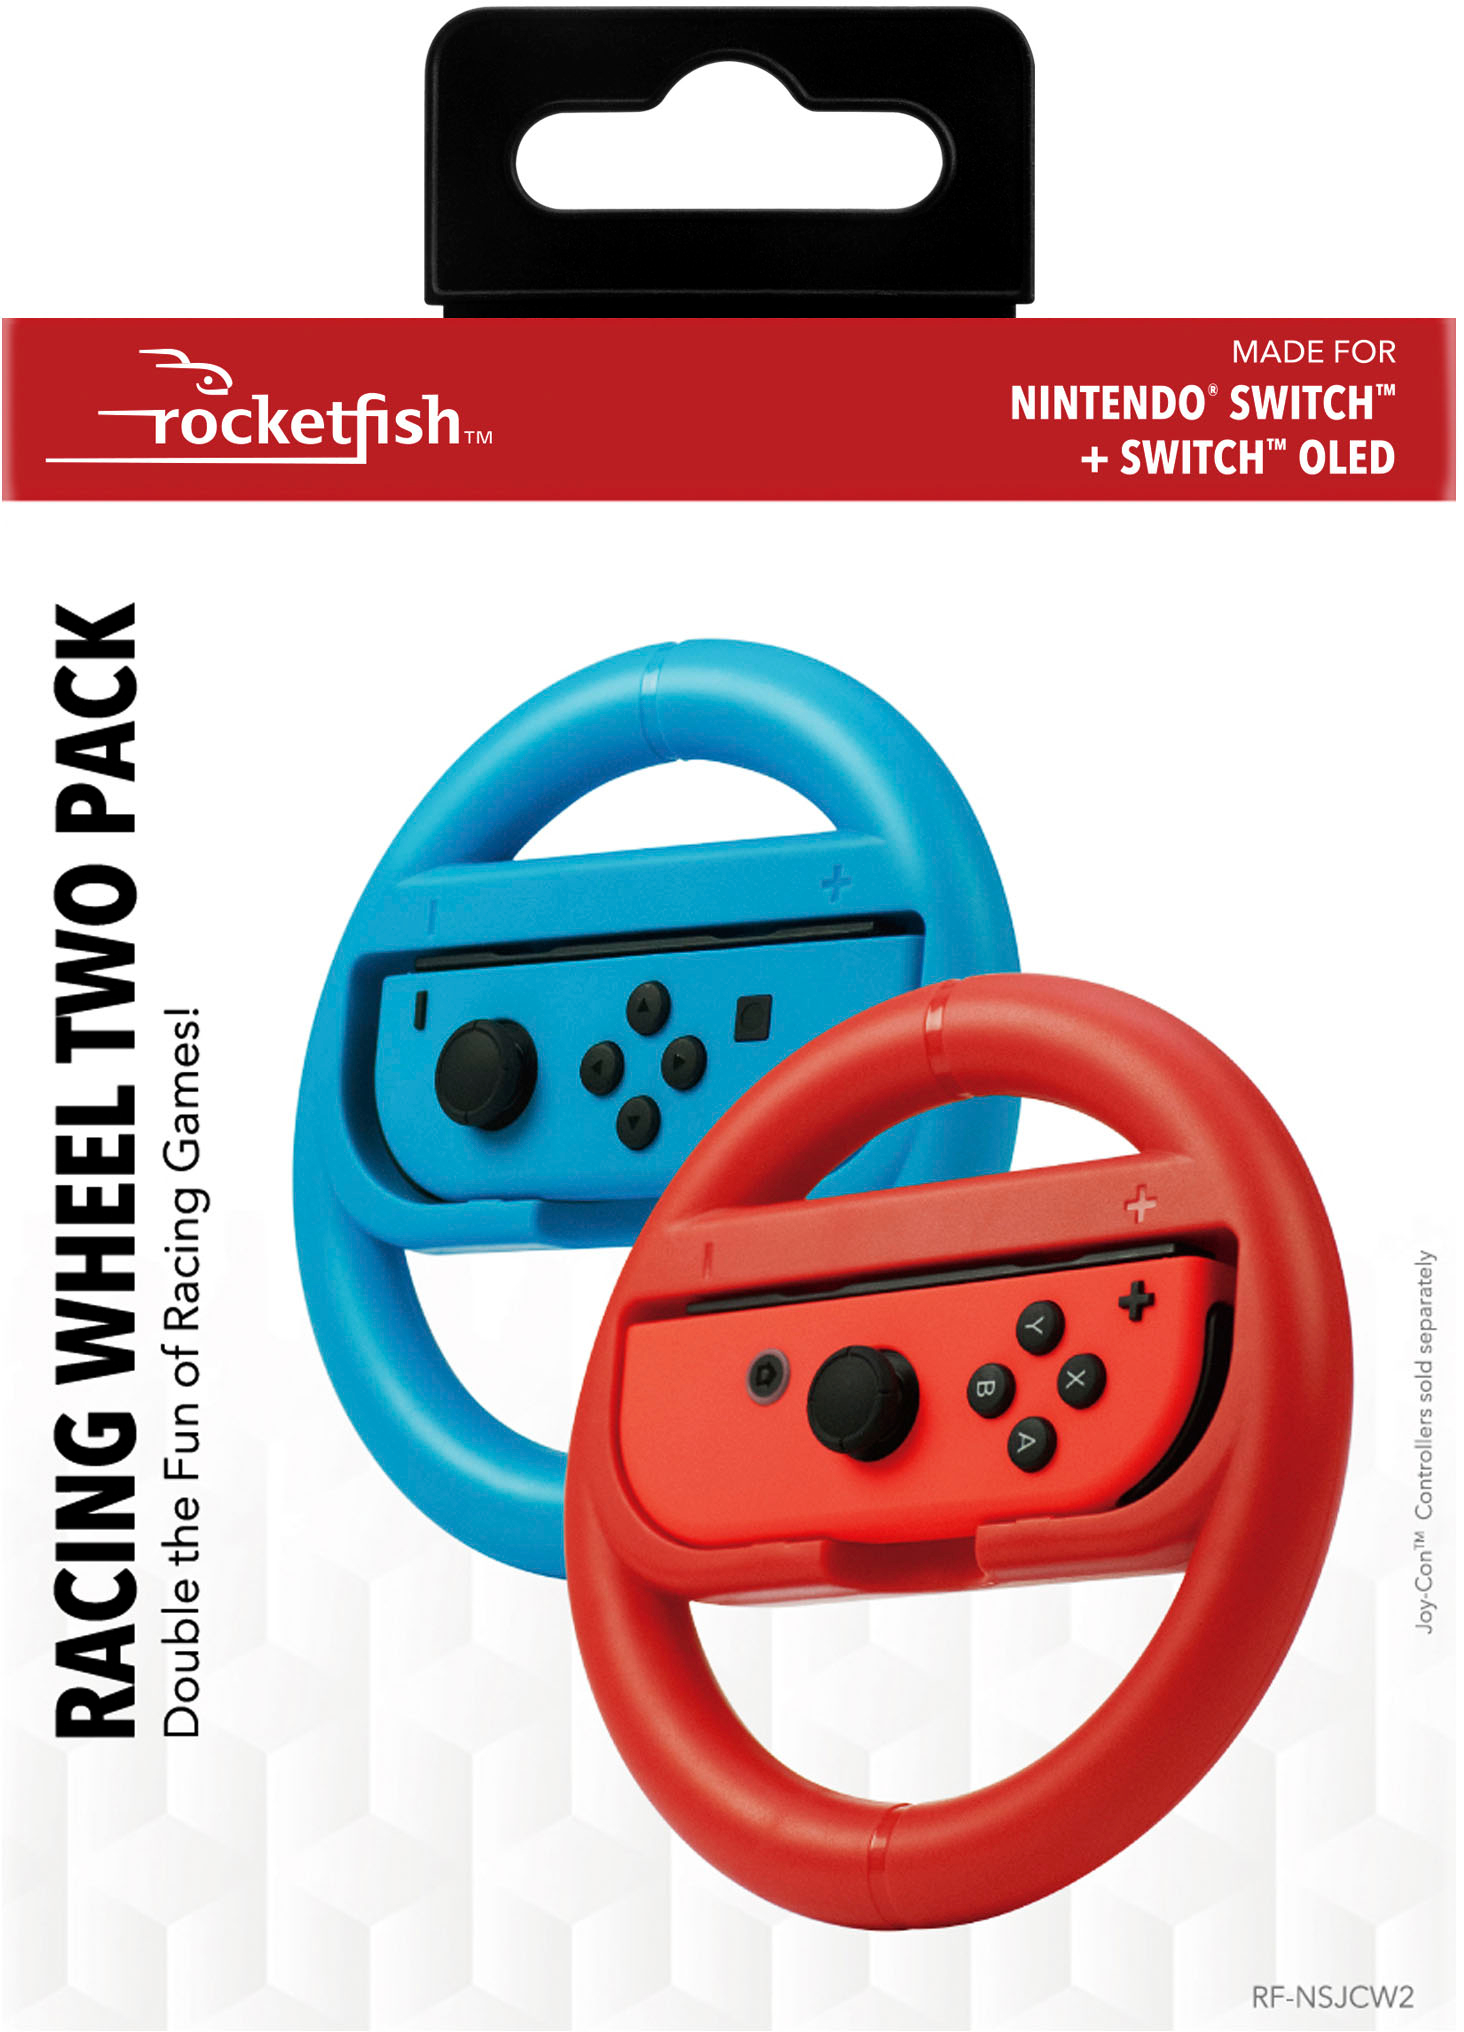 RF-NSJCW2 Rocketfish™ Wheel Pack Switch Racing Nintendo Best Joy-Con For - Switch & Buy Two Red/Blue OLED